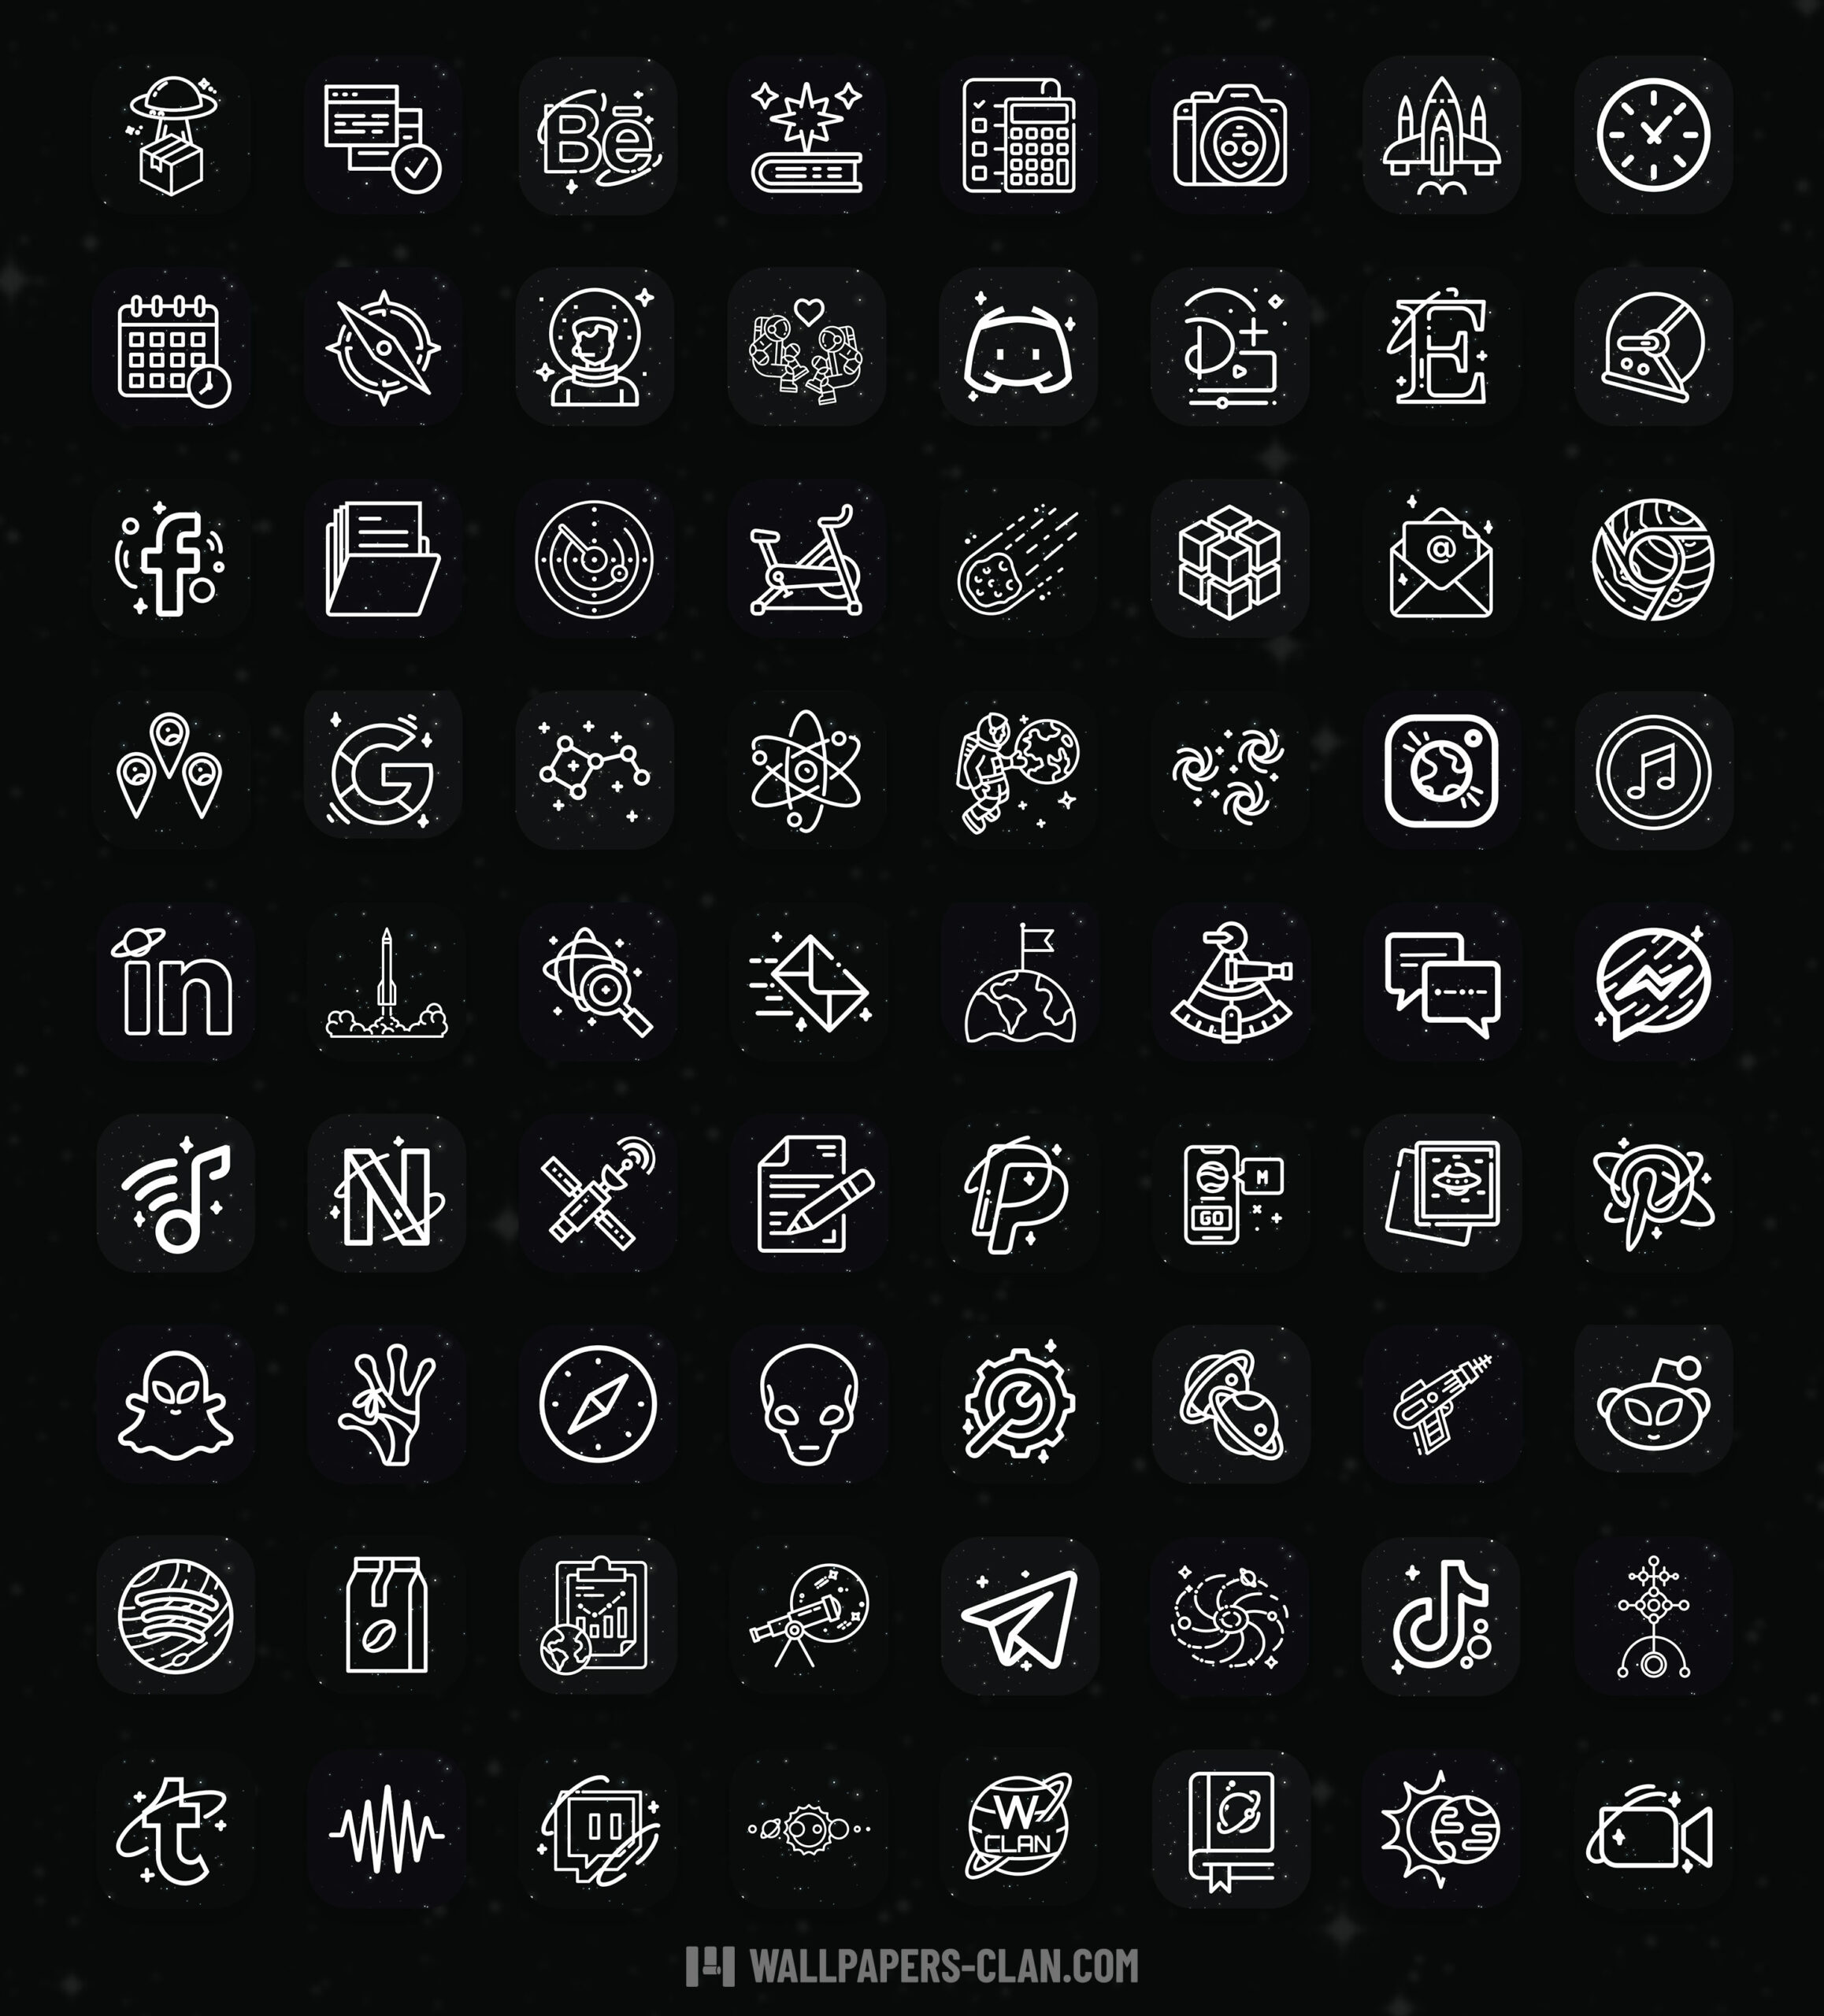 Space App Icons iOS & Android Black nad White App Icons for iP